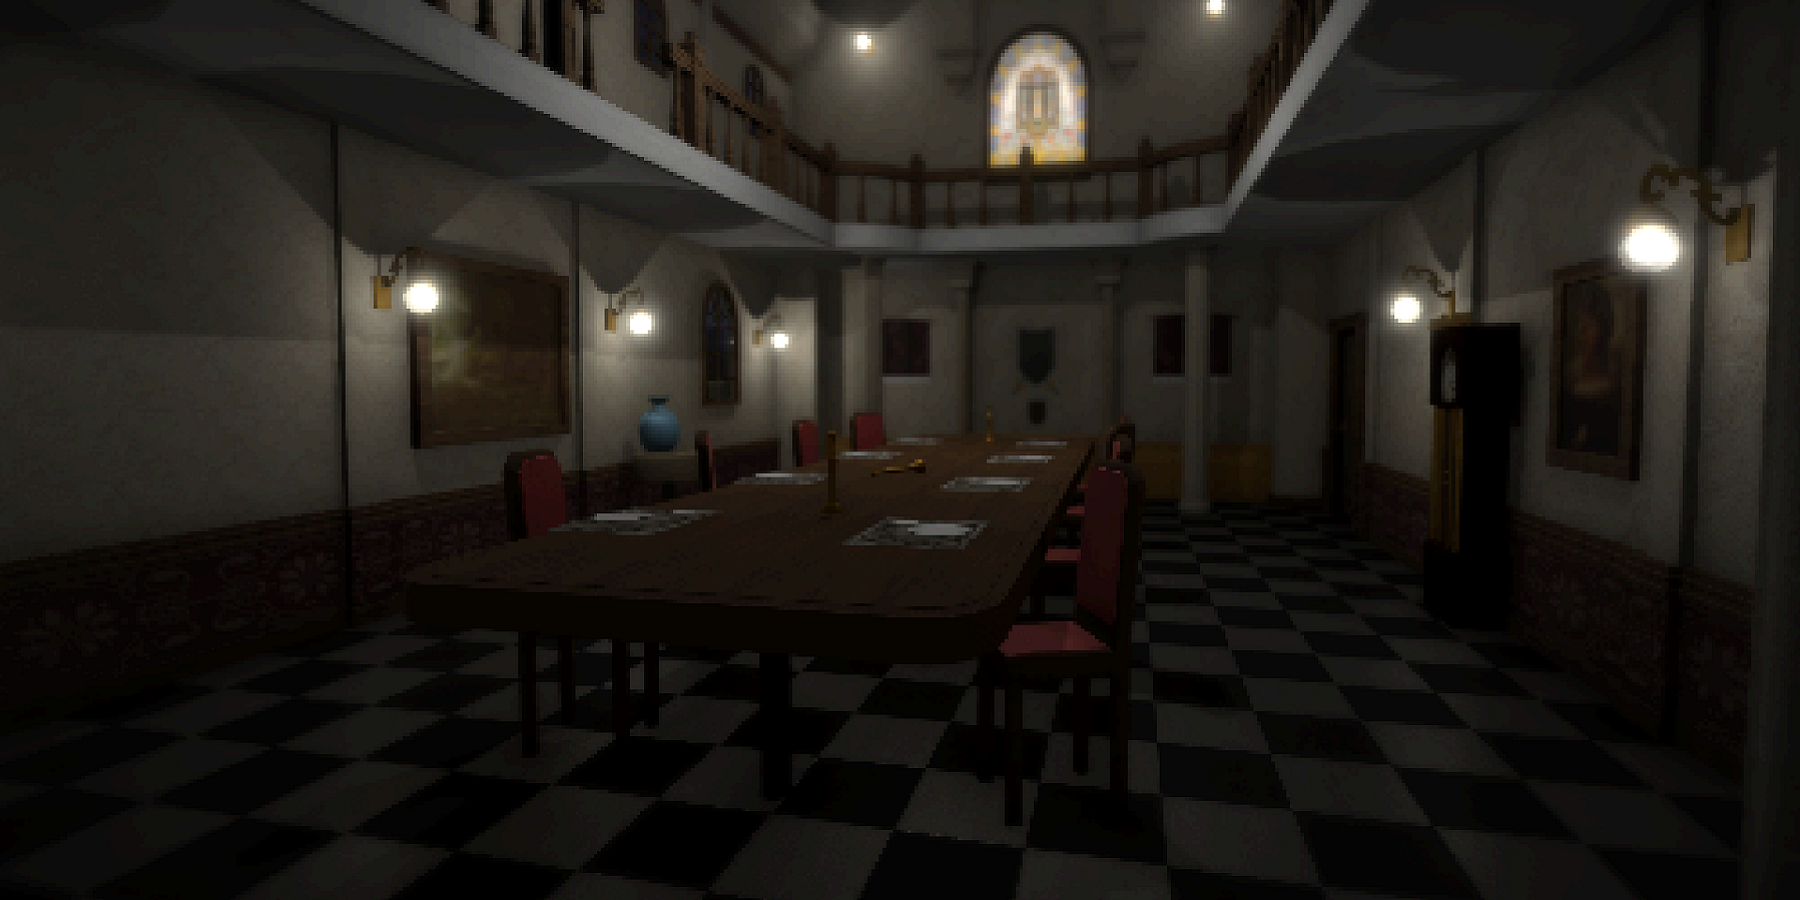 A screenshot from the Resident Evil fan remake showing the dining hall.